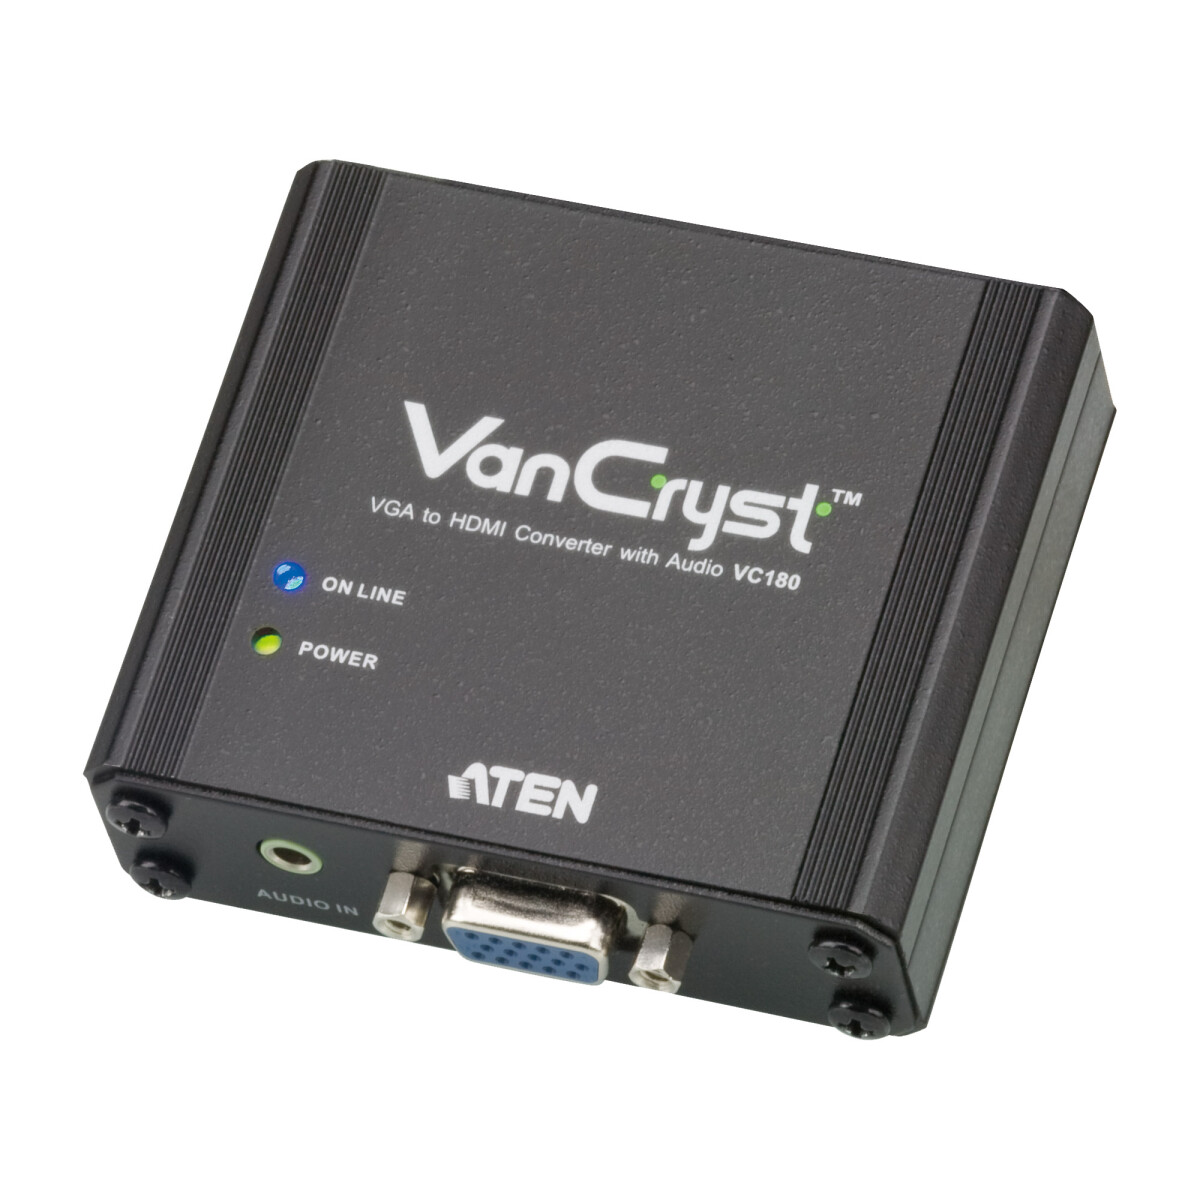 ATEN VC180 VGA to HDMI Converter, up to 1080p, with Audio